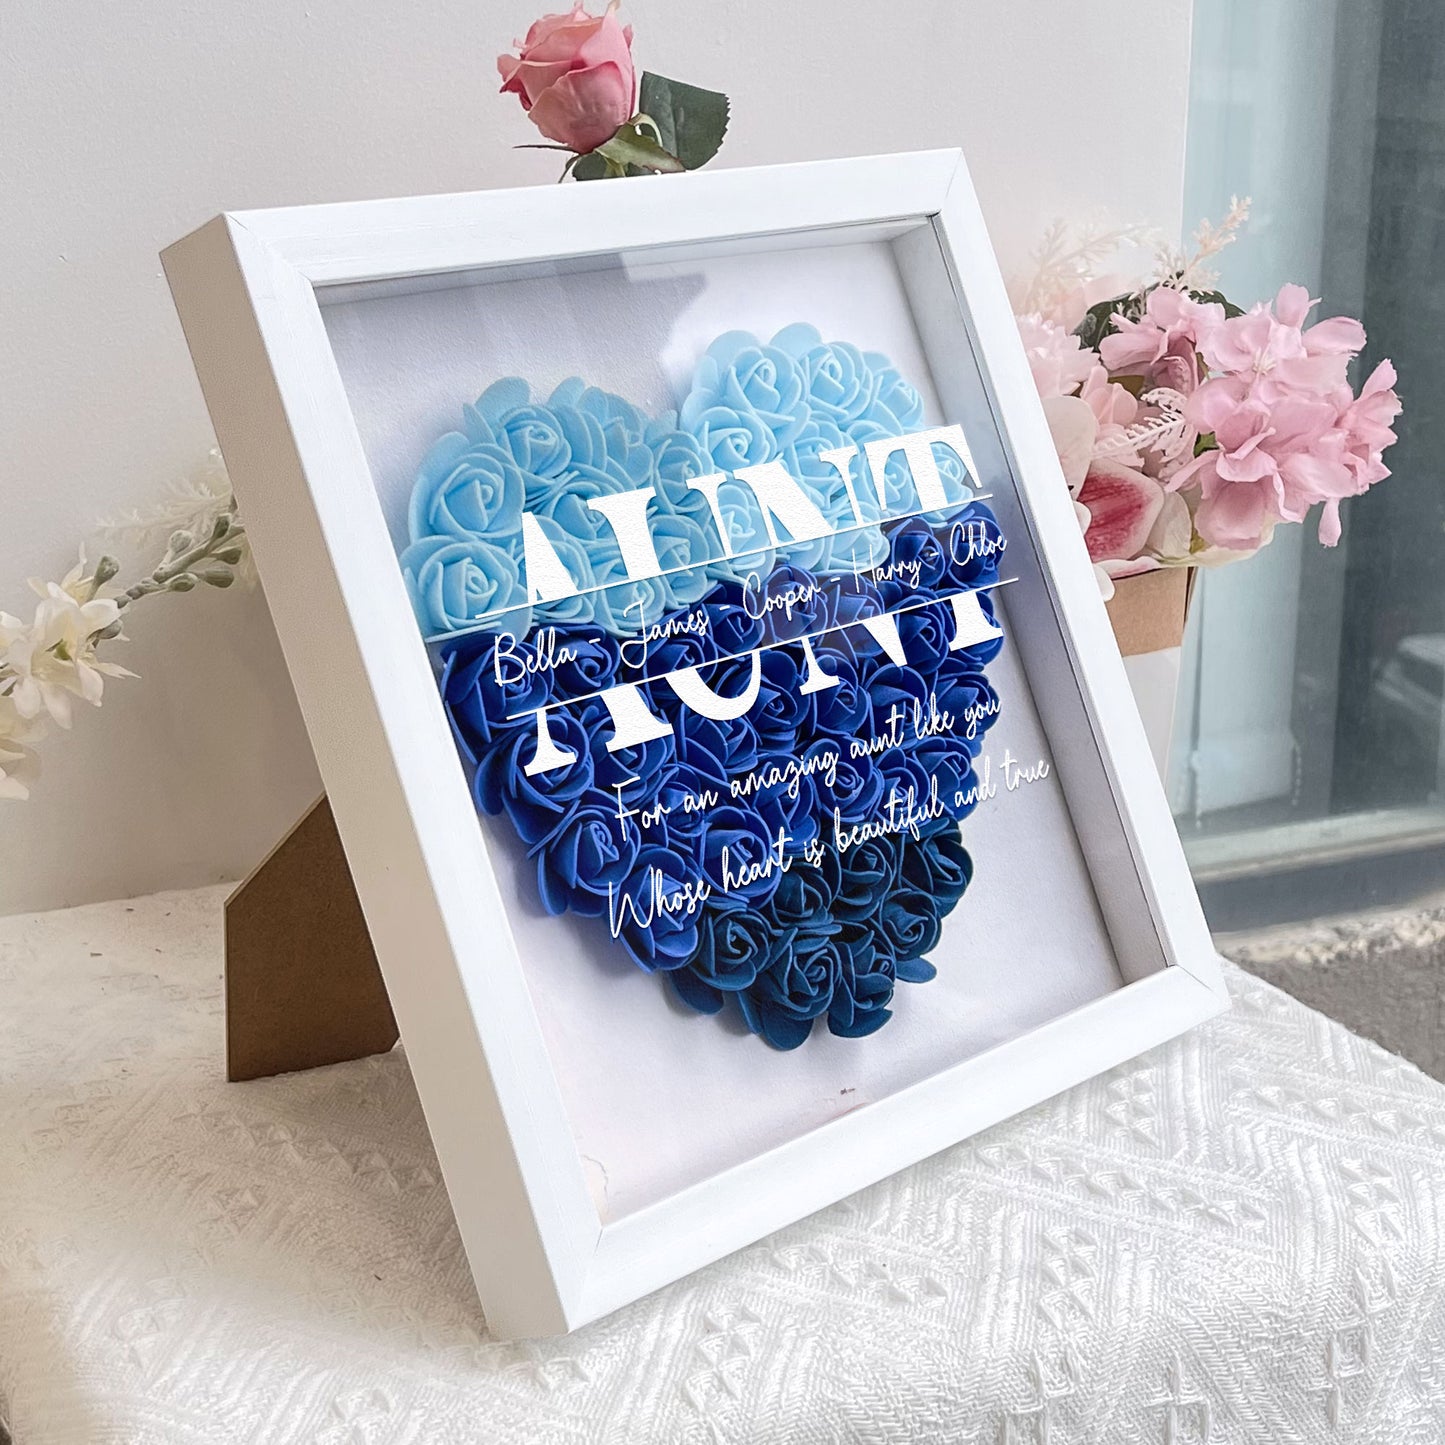 For An Amazing Aunt Like You - Personalized Flower Shadow Box